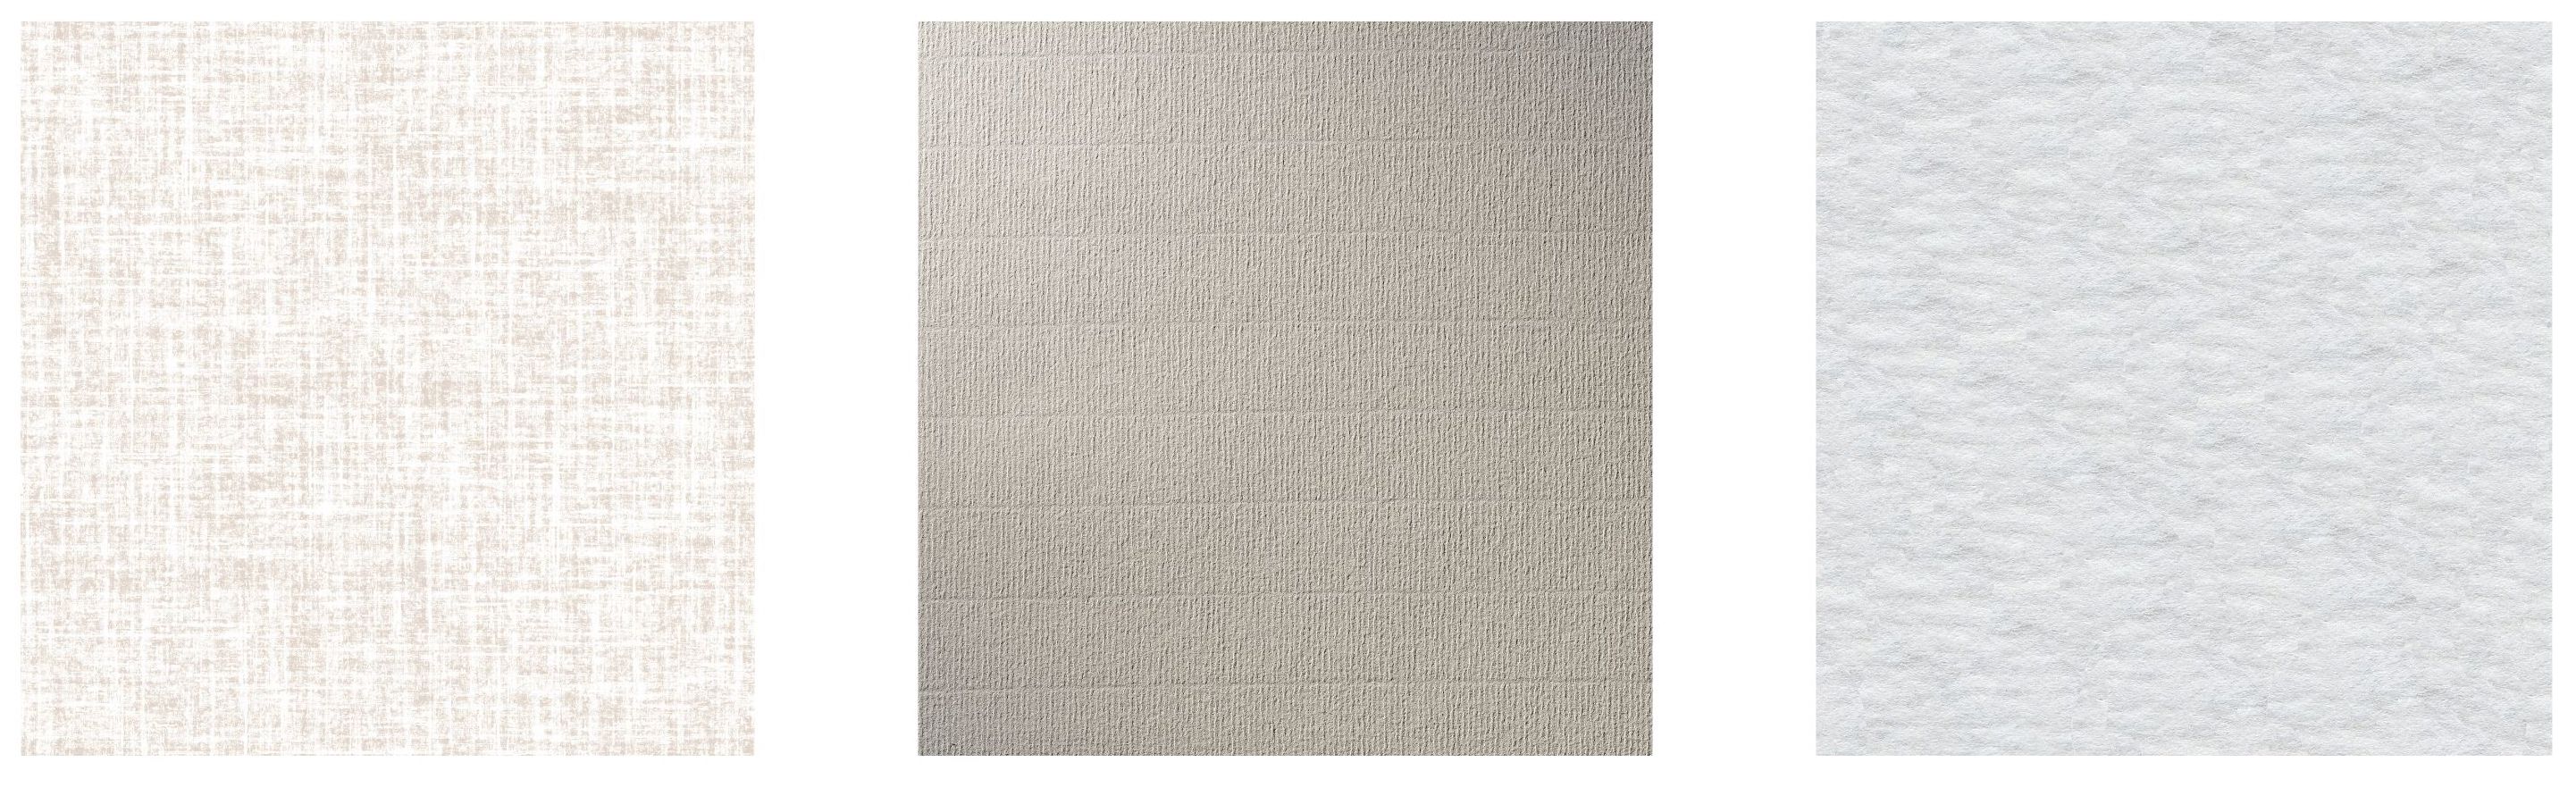 types of paper finishes - embossed